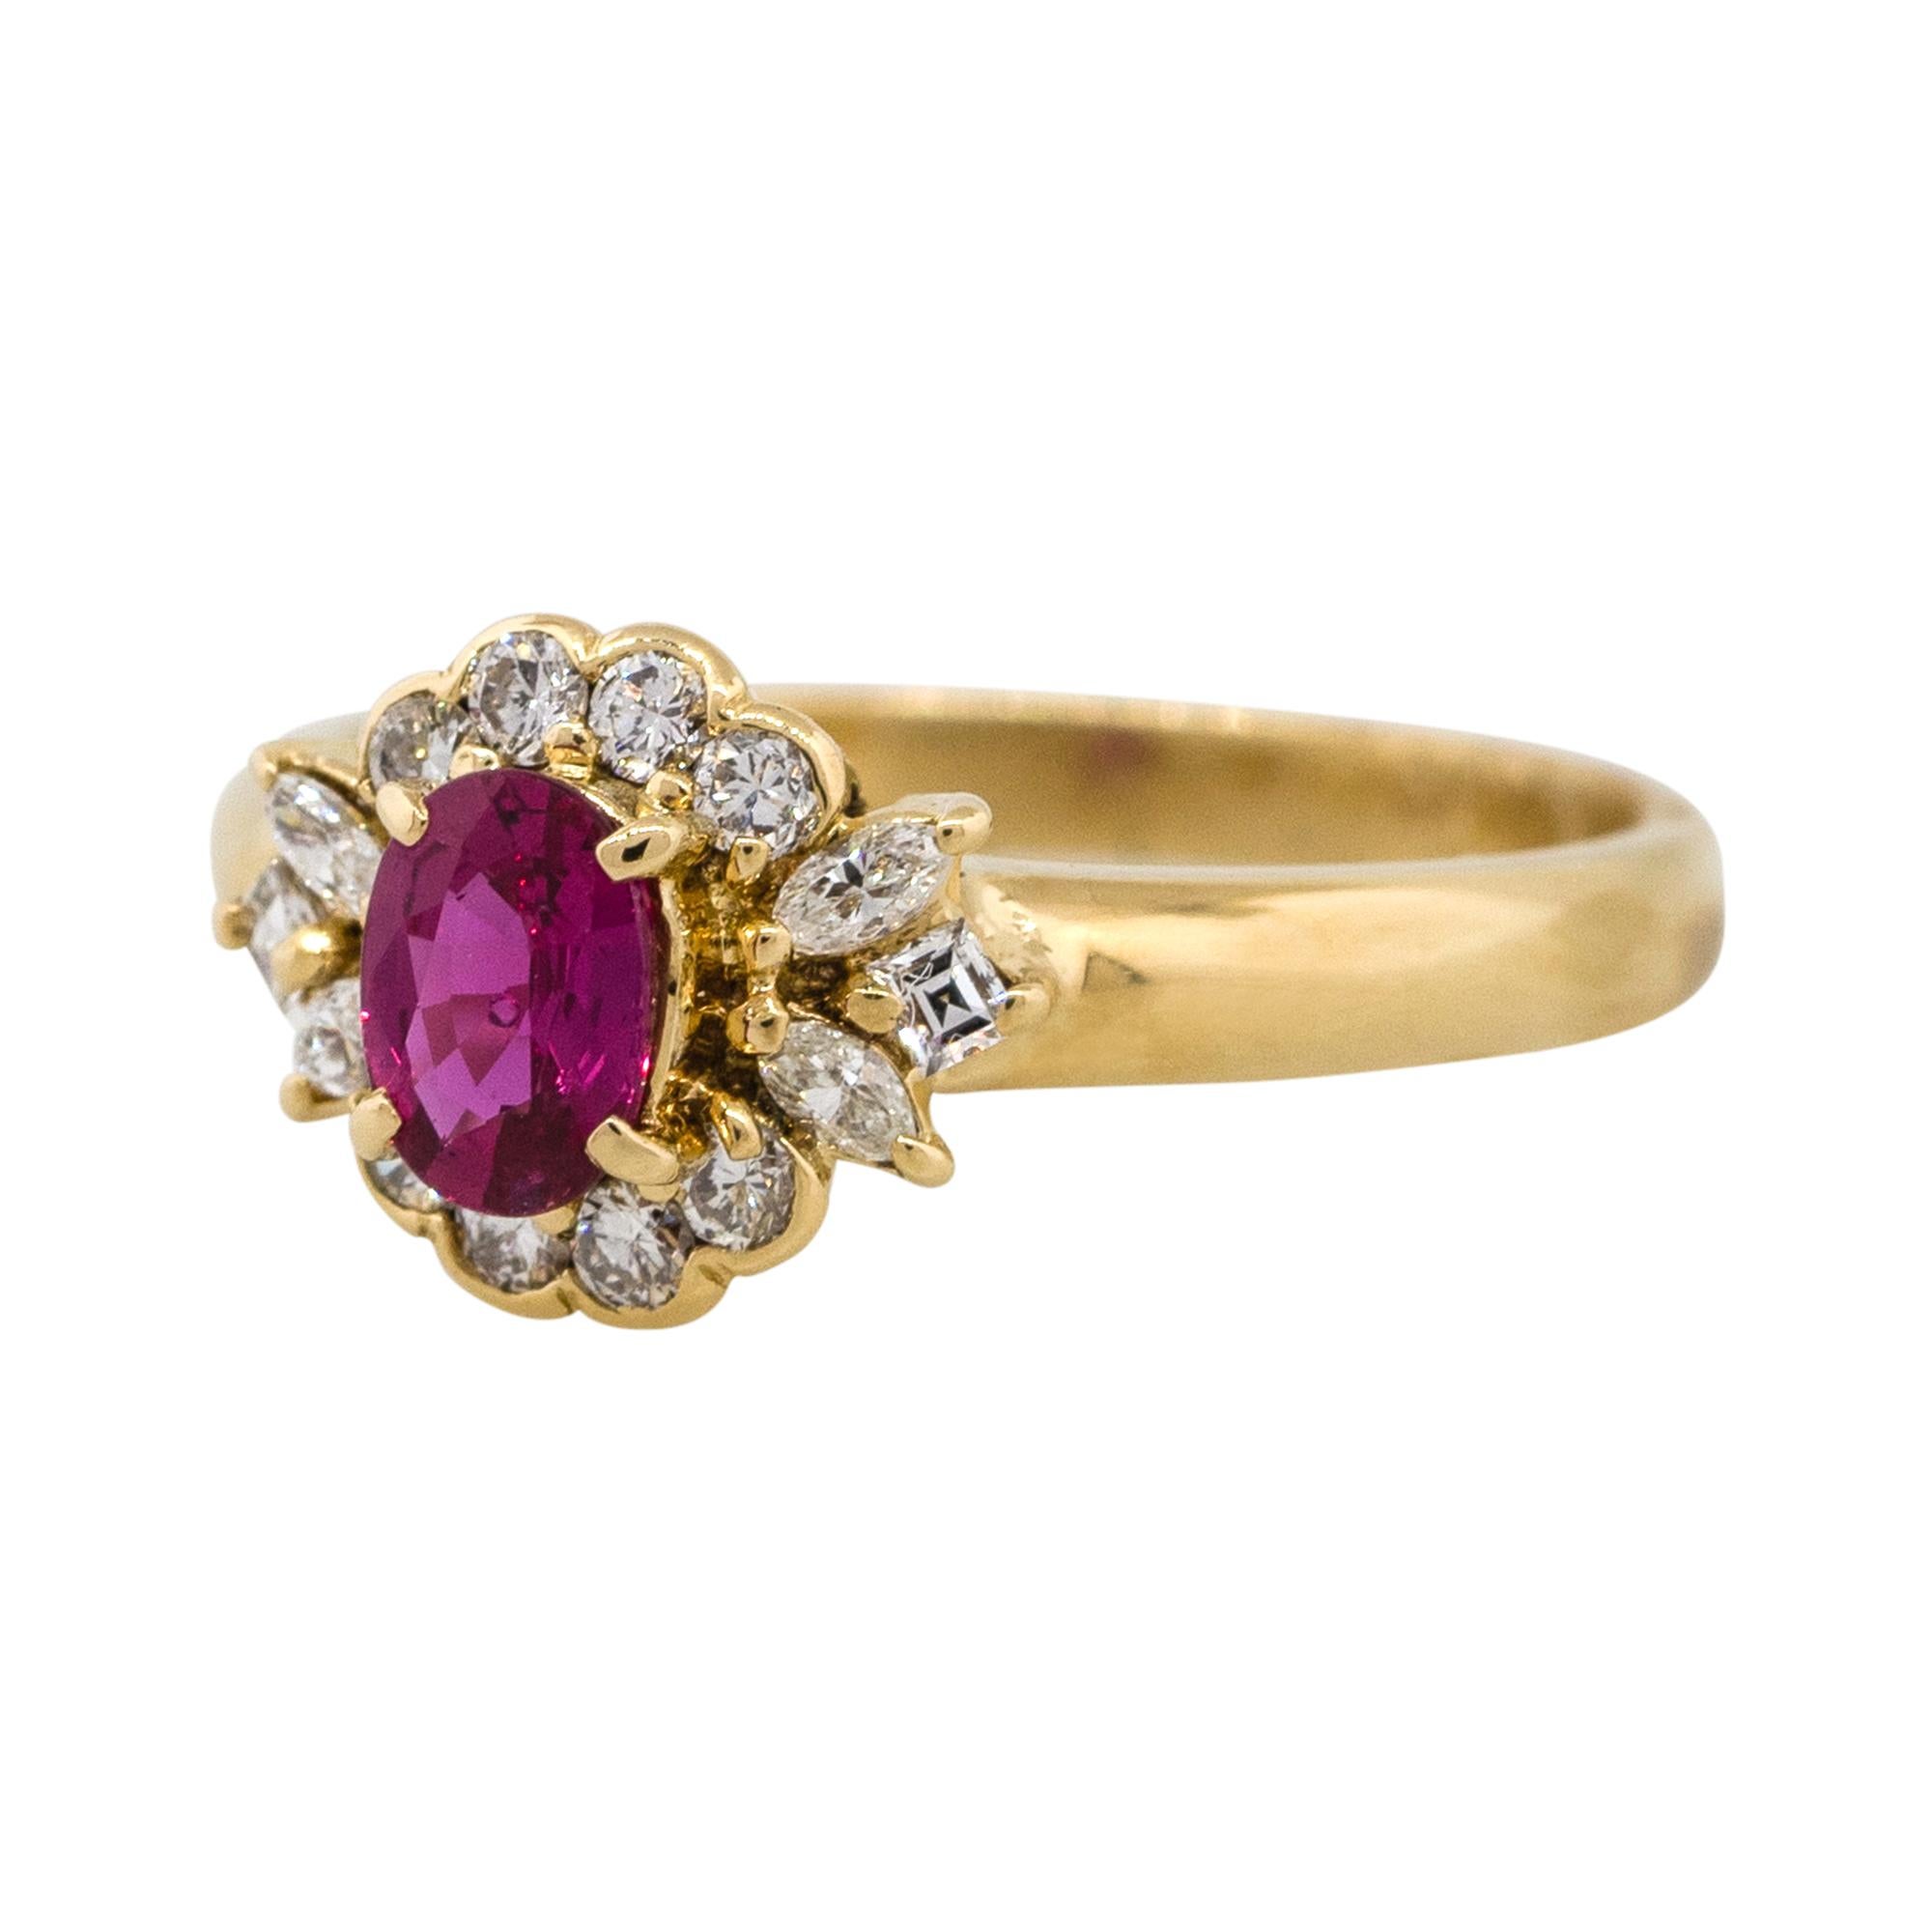 Material: 18k Yellow gold
Gemstone details: Approx. 0.45ctw oval shaped Ruby center gemstone
Diamond details: Approx. 0.39ctw of round cut and marquise cut Diamonds. Diamonds are G/H in color and VS in clarity
Ring Size: 5.75
Ring Measurements: